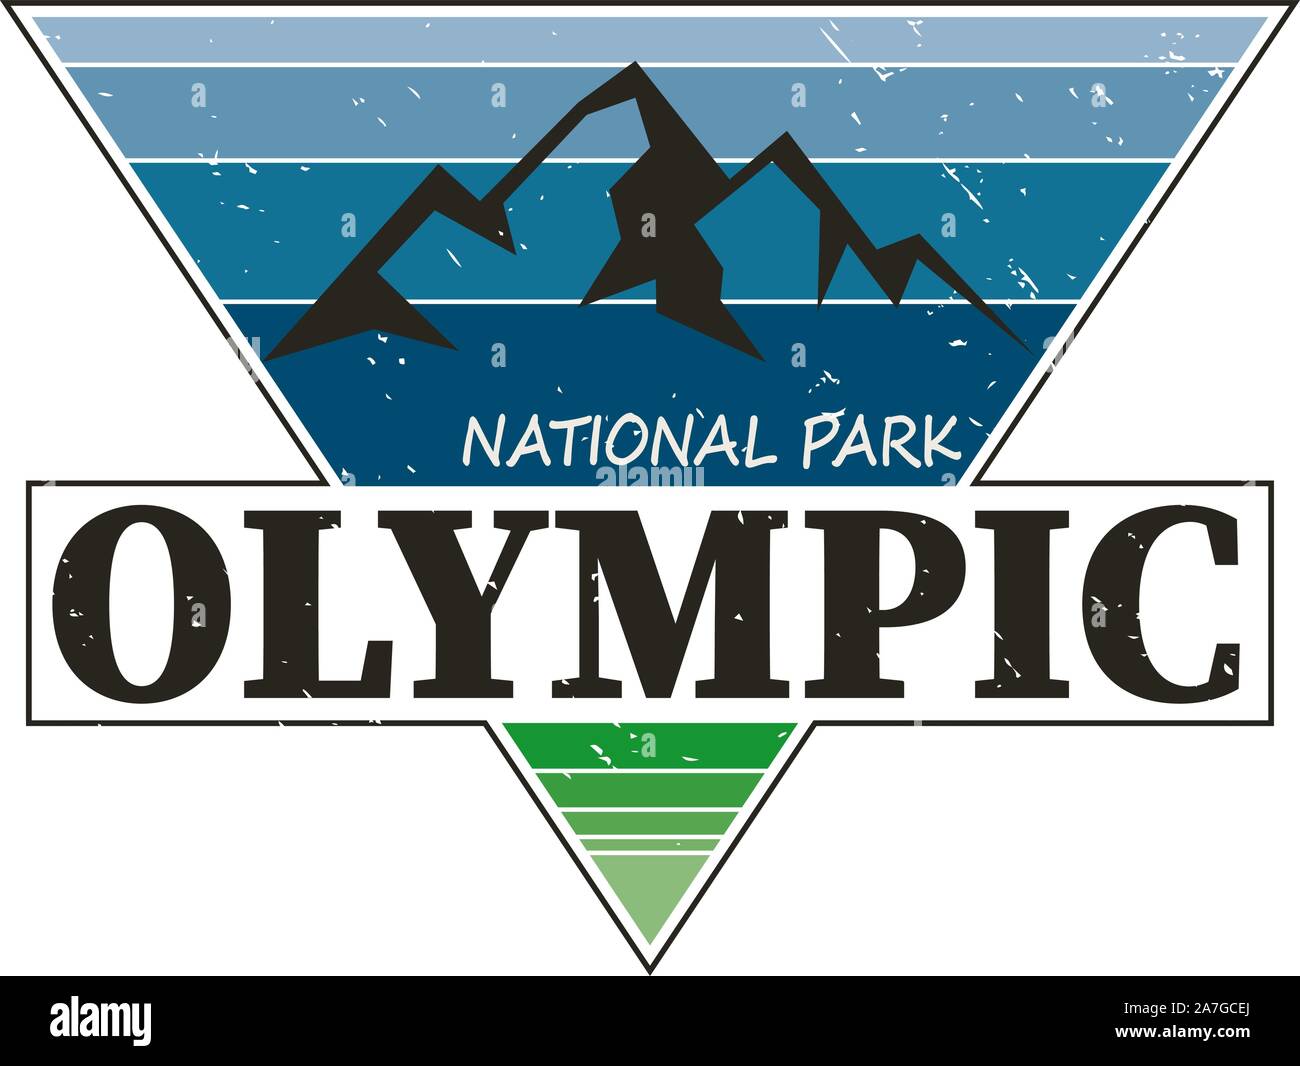 Olympic National Park, USA outdoor adventure illustration Stock Vector